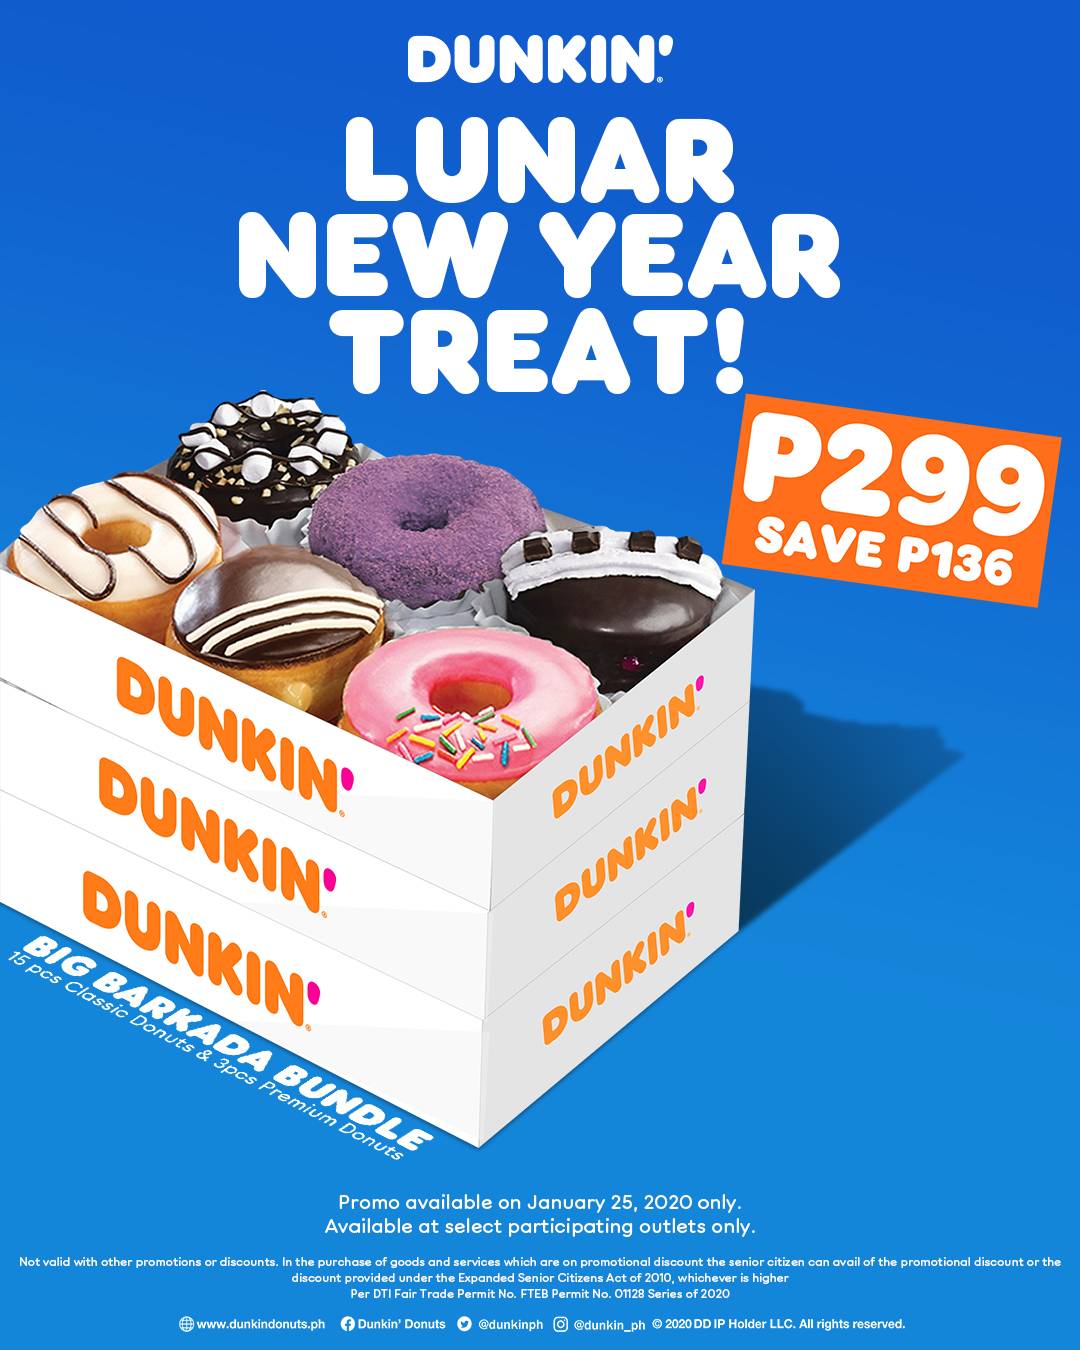 Dunkin' Donuts Lunar New Year Treat Jan. 25, 2020 ONLY